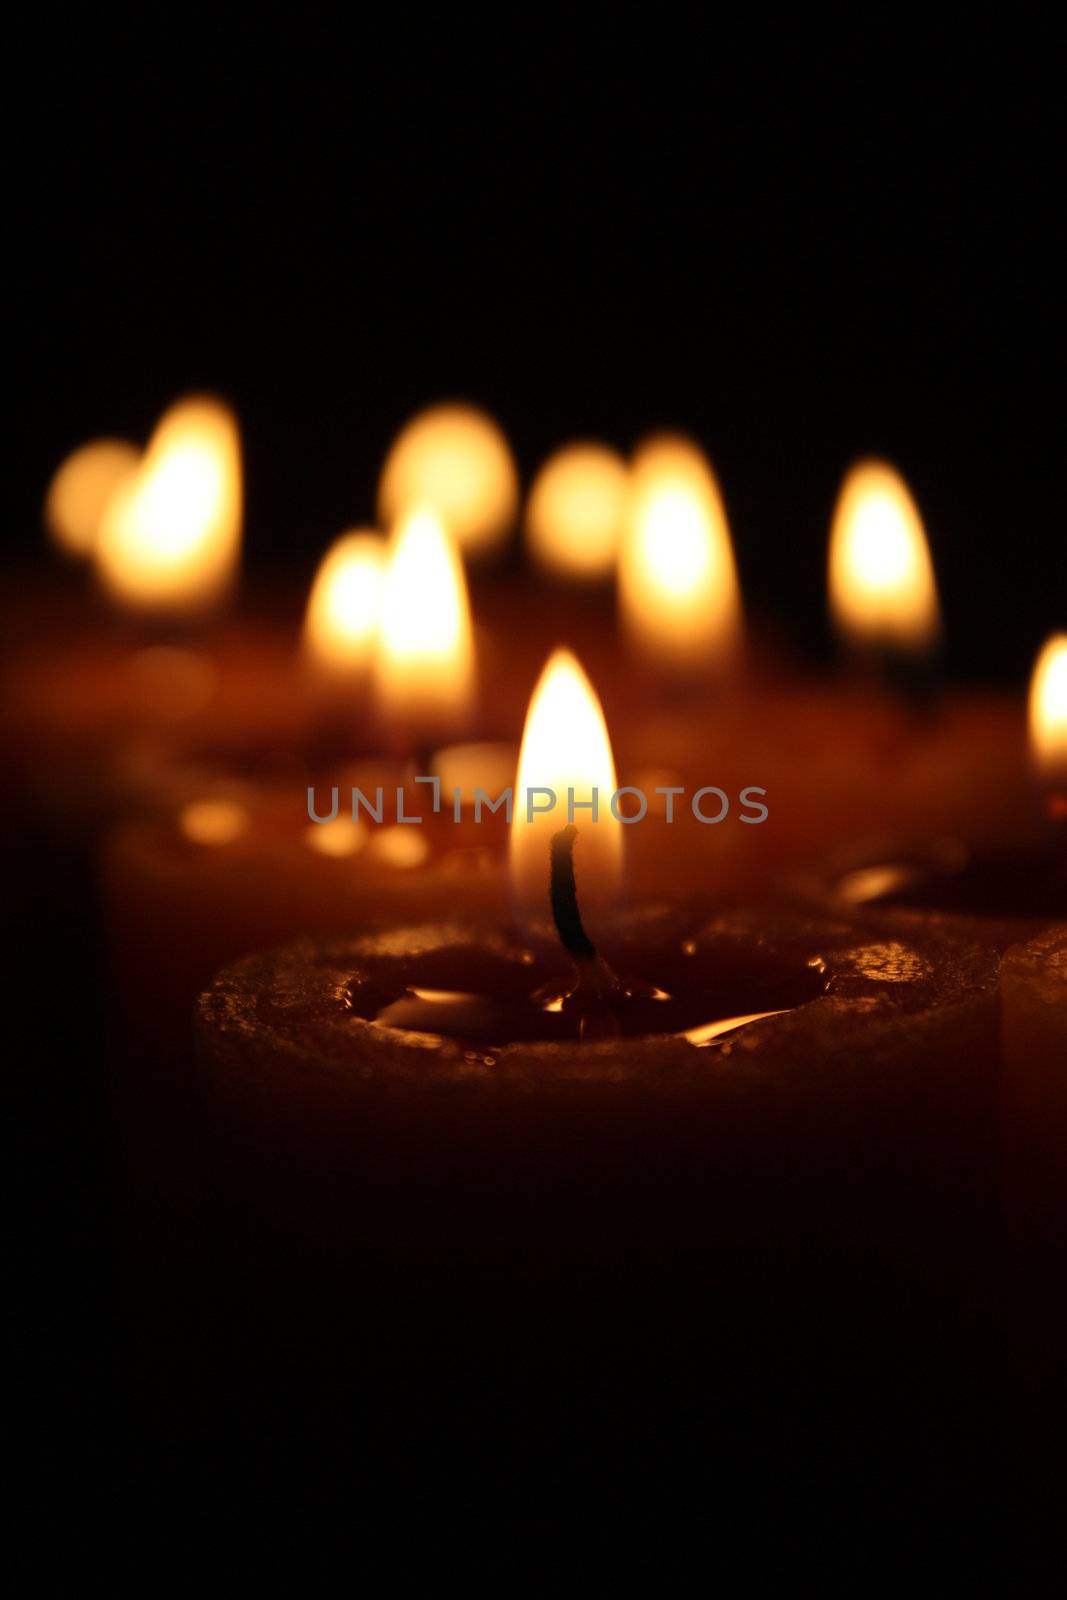 Burning aroma candle in focus and other candles out of focus